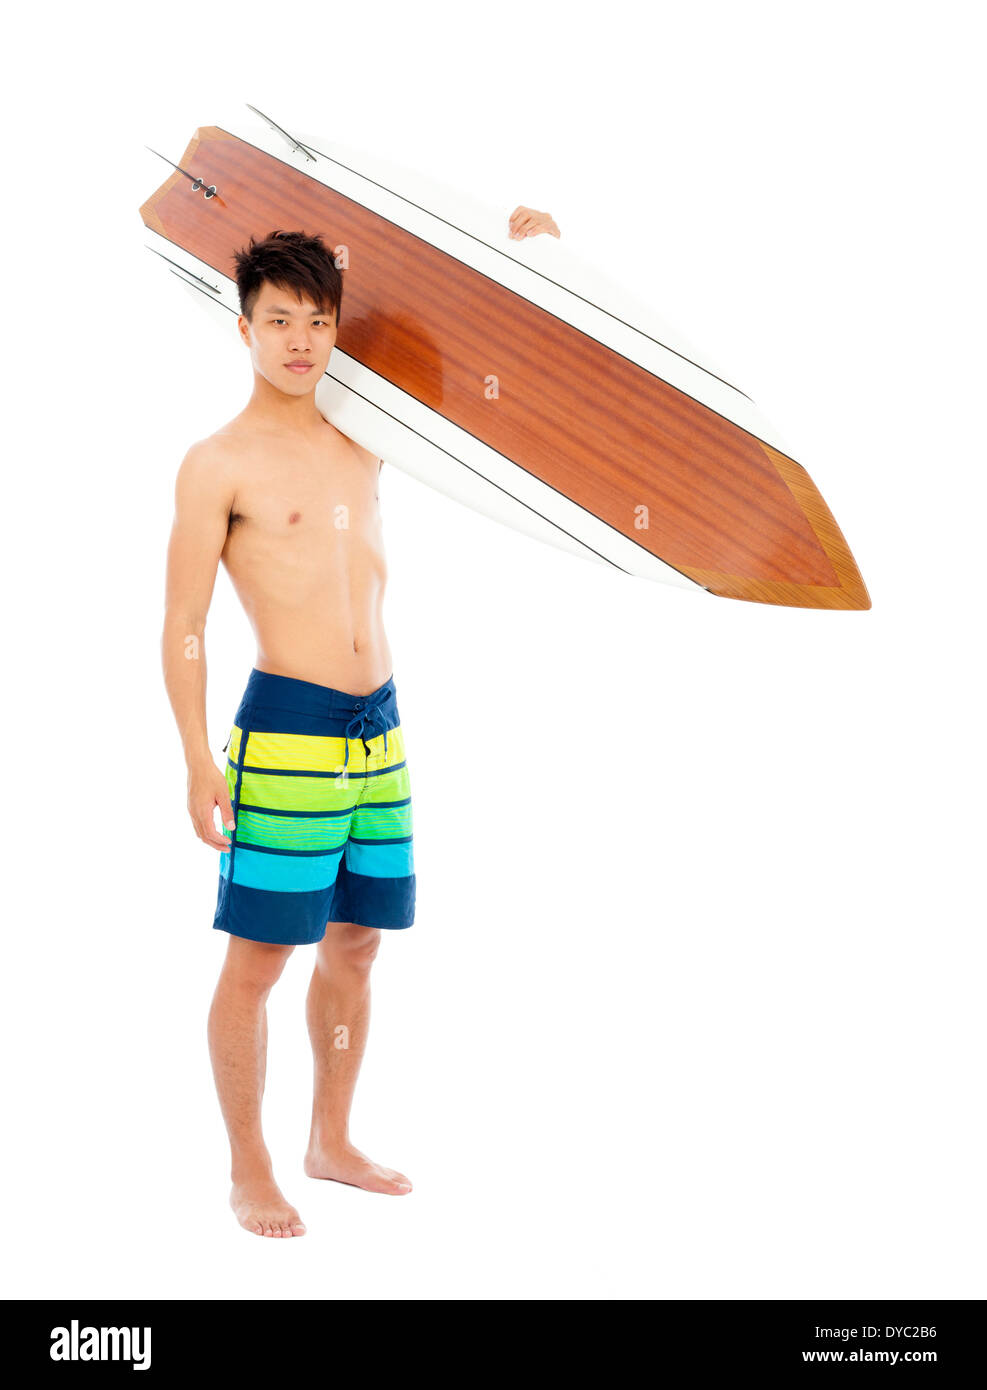 sunny surfer put surfboard on the shoulder in studio Stock Photo